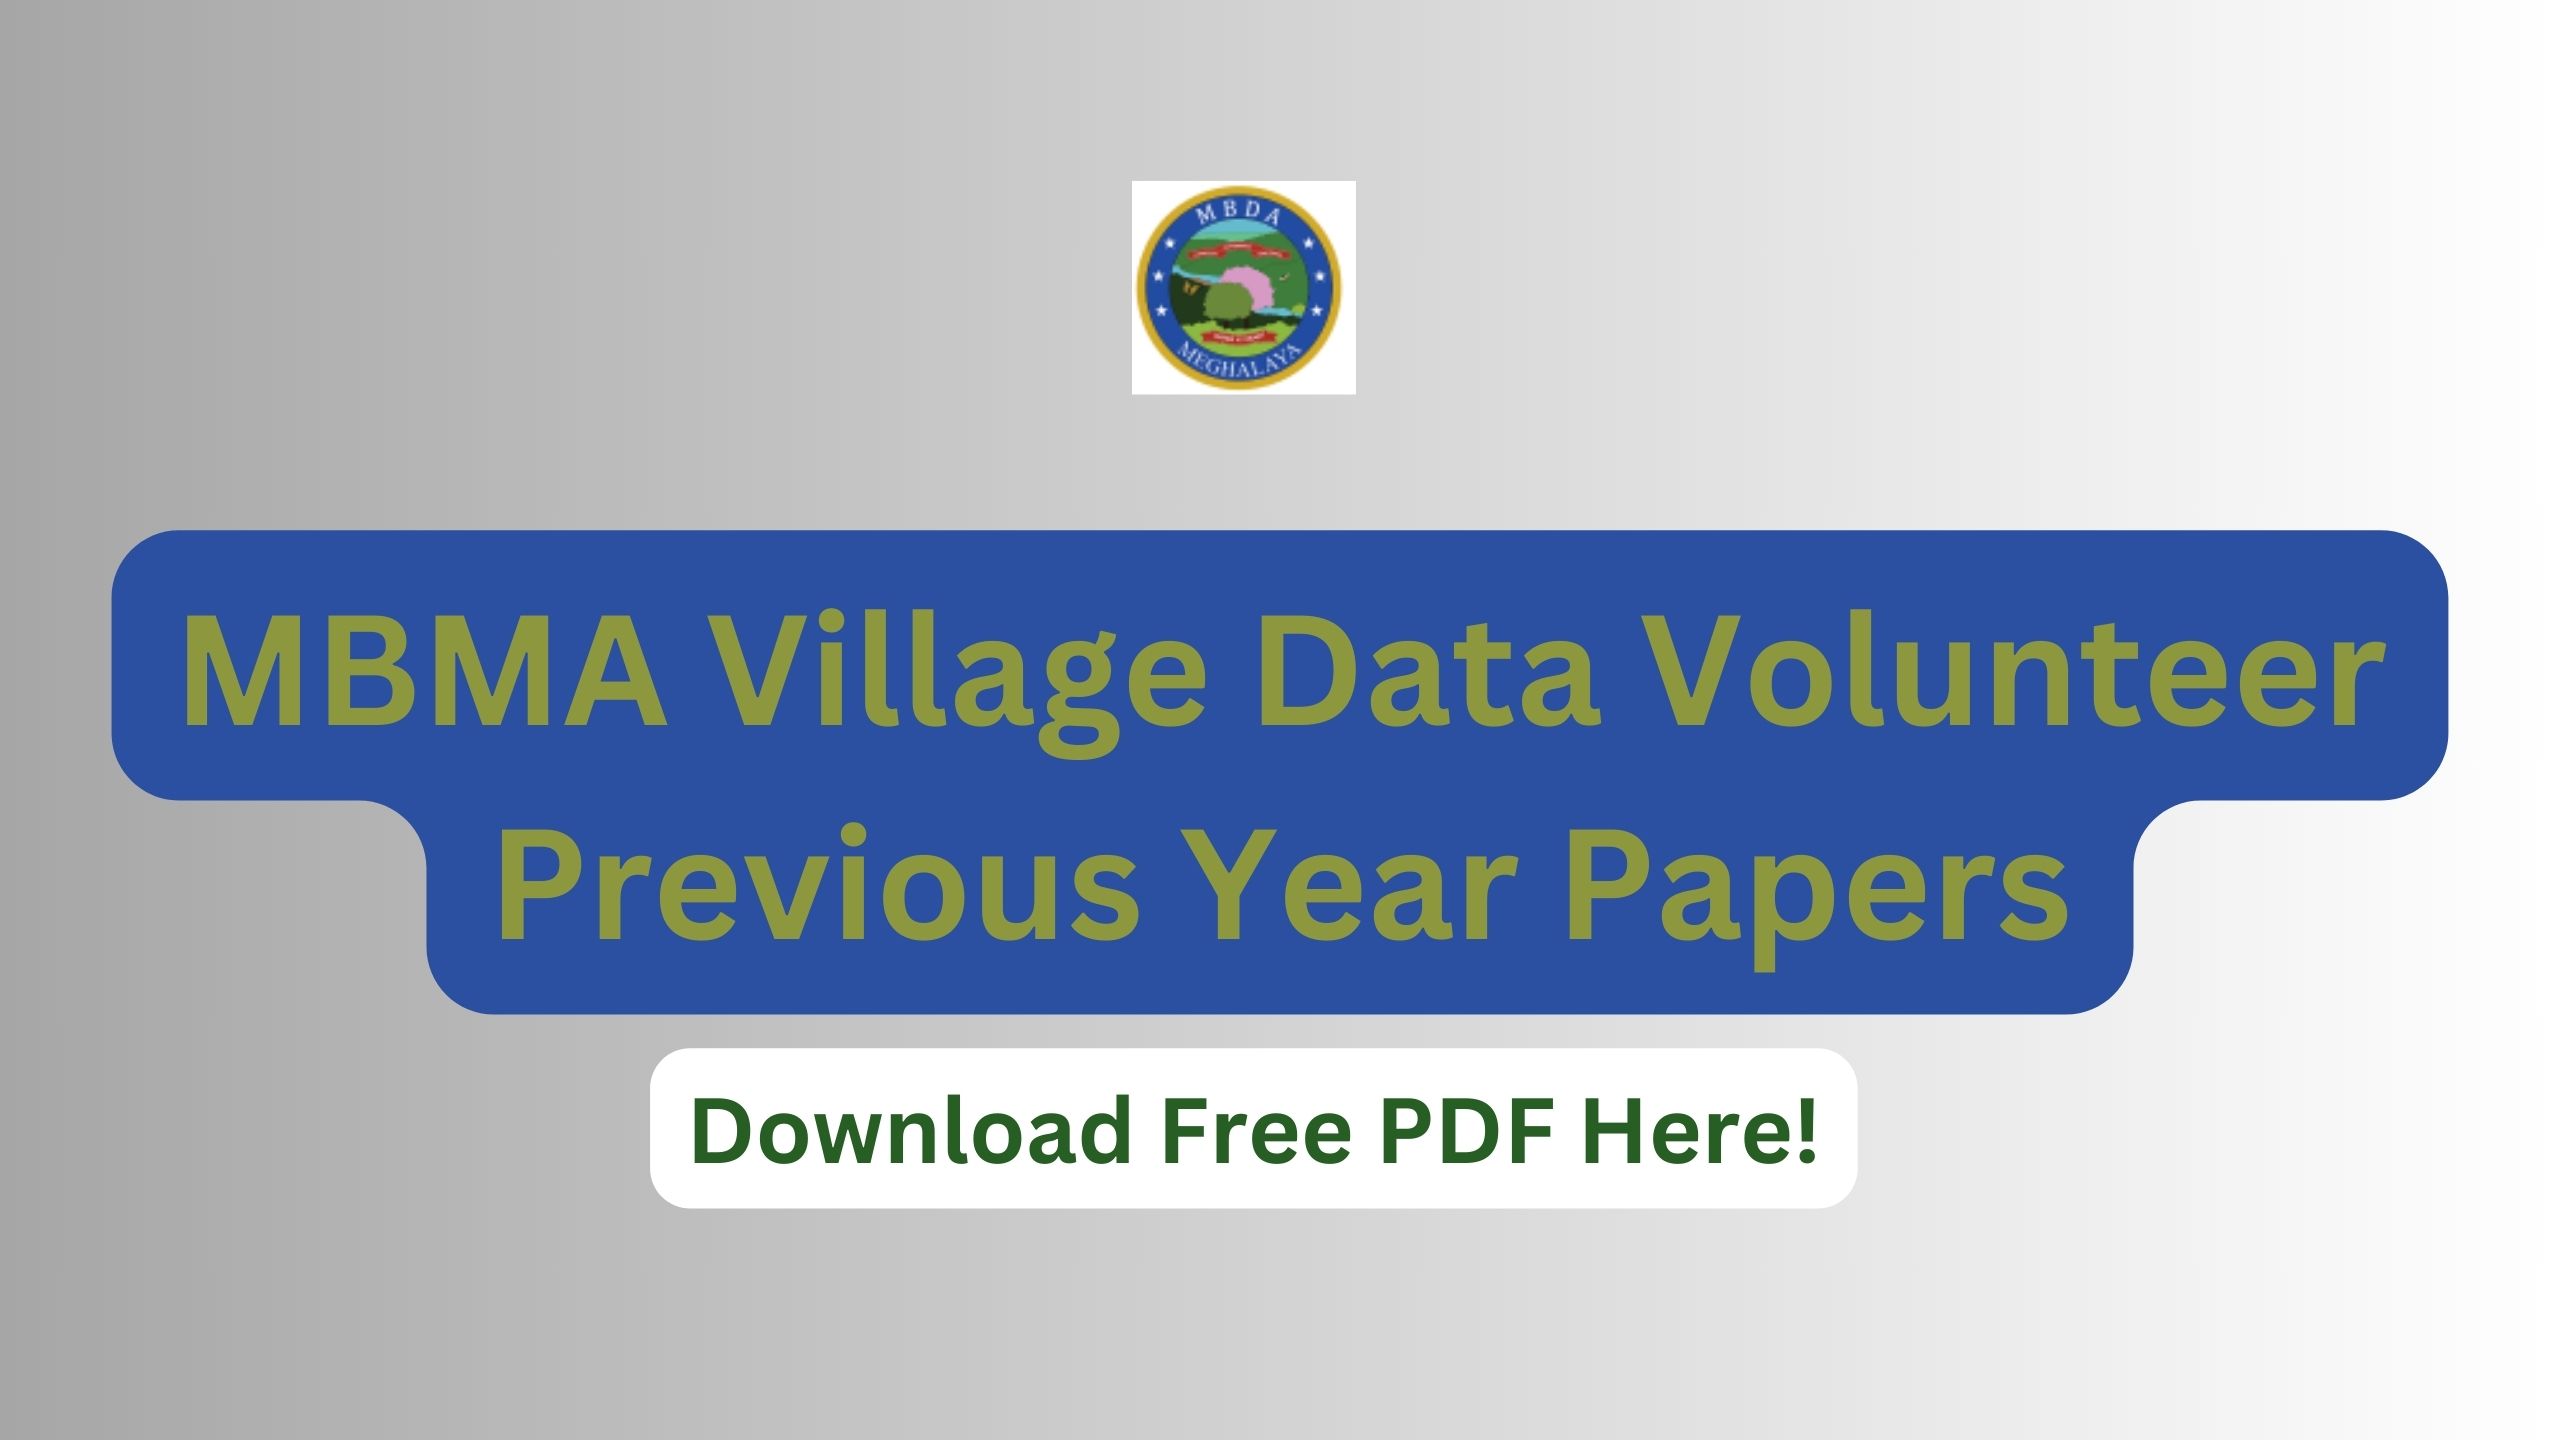 MBMA Village Data Volunteer Previous Year Papers